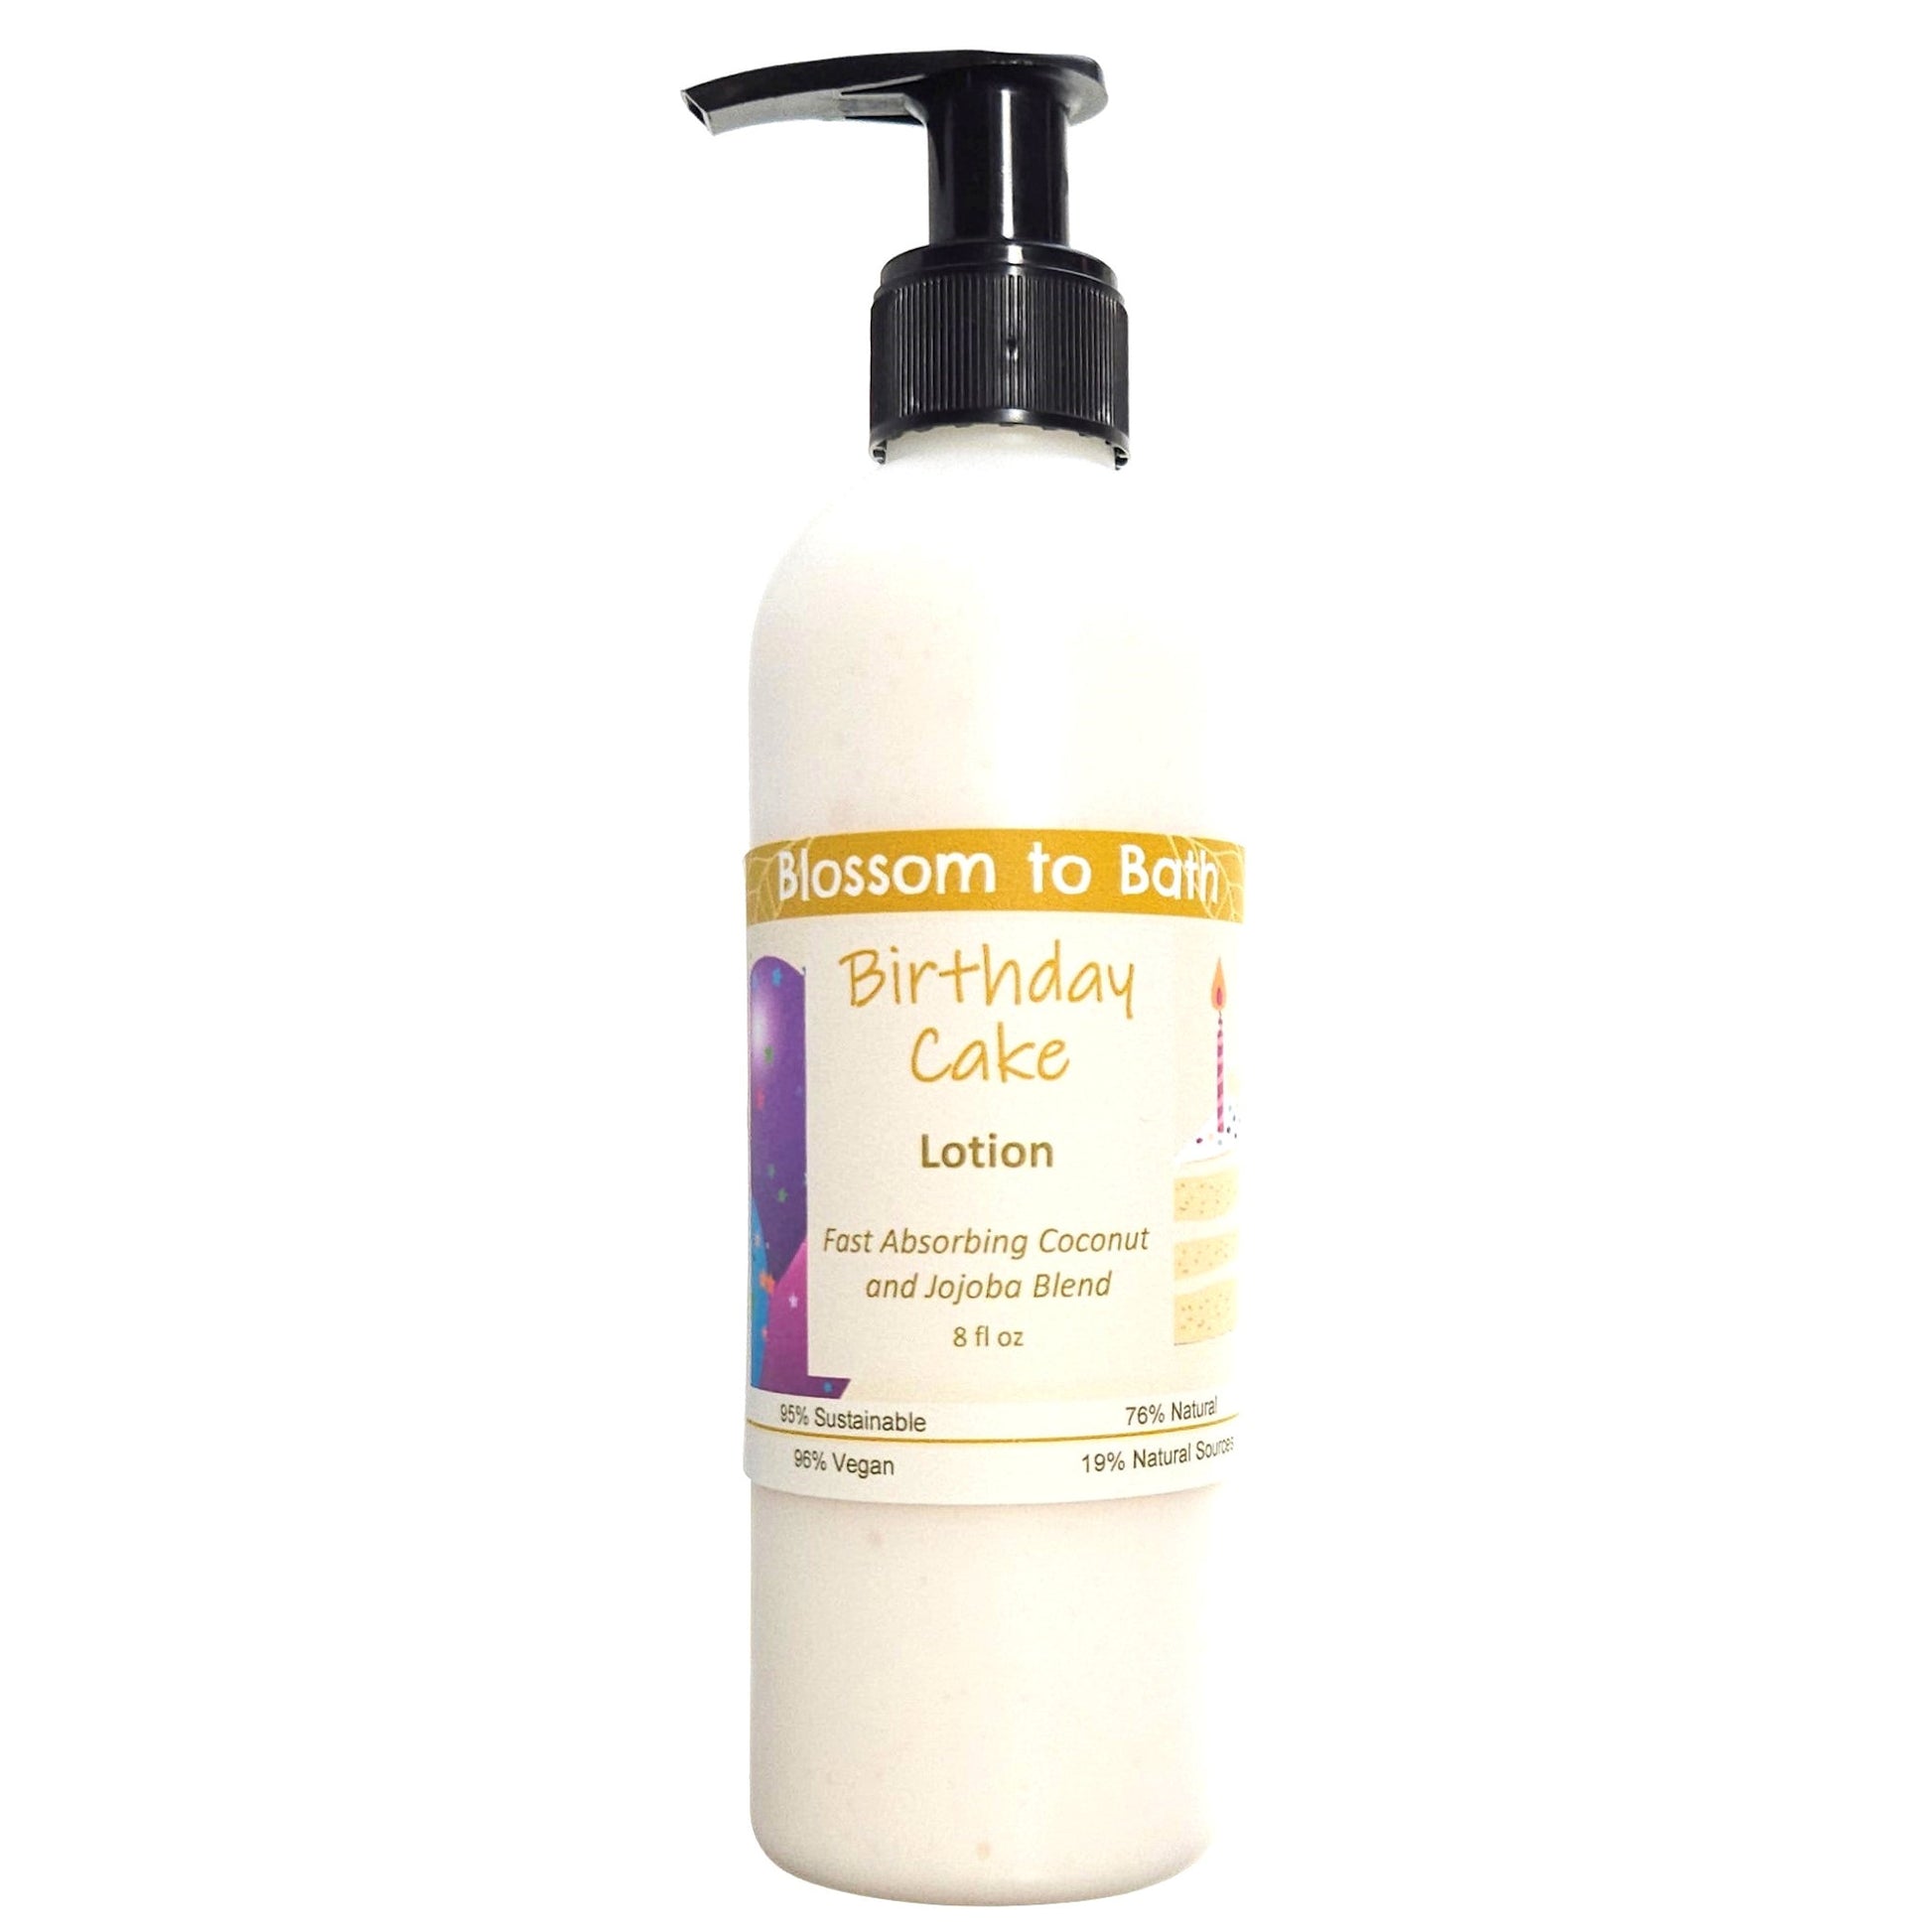 Buy Blossom to Bath Birthday Cake Lotion from Flowersong Soap Studio.  Daily moisture  that soaks in quickly made with organic oils and butters that soften and smooth the skin  The essence of a vanilla buttercream frosted birthday cake.